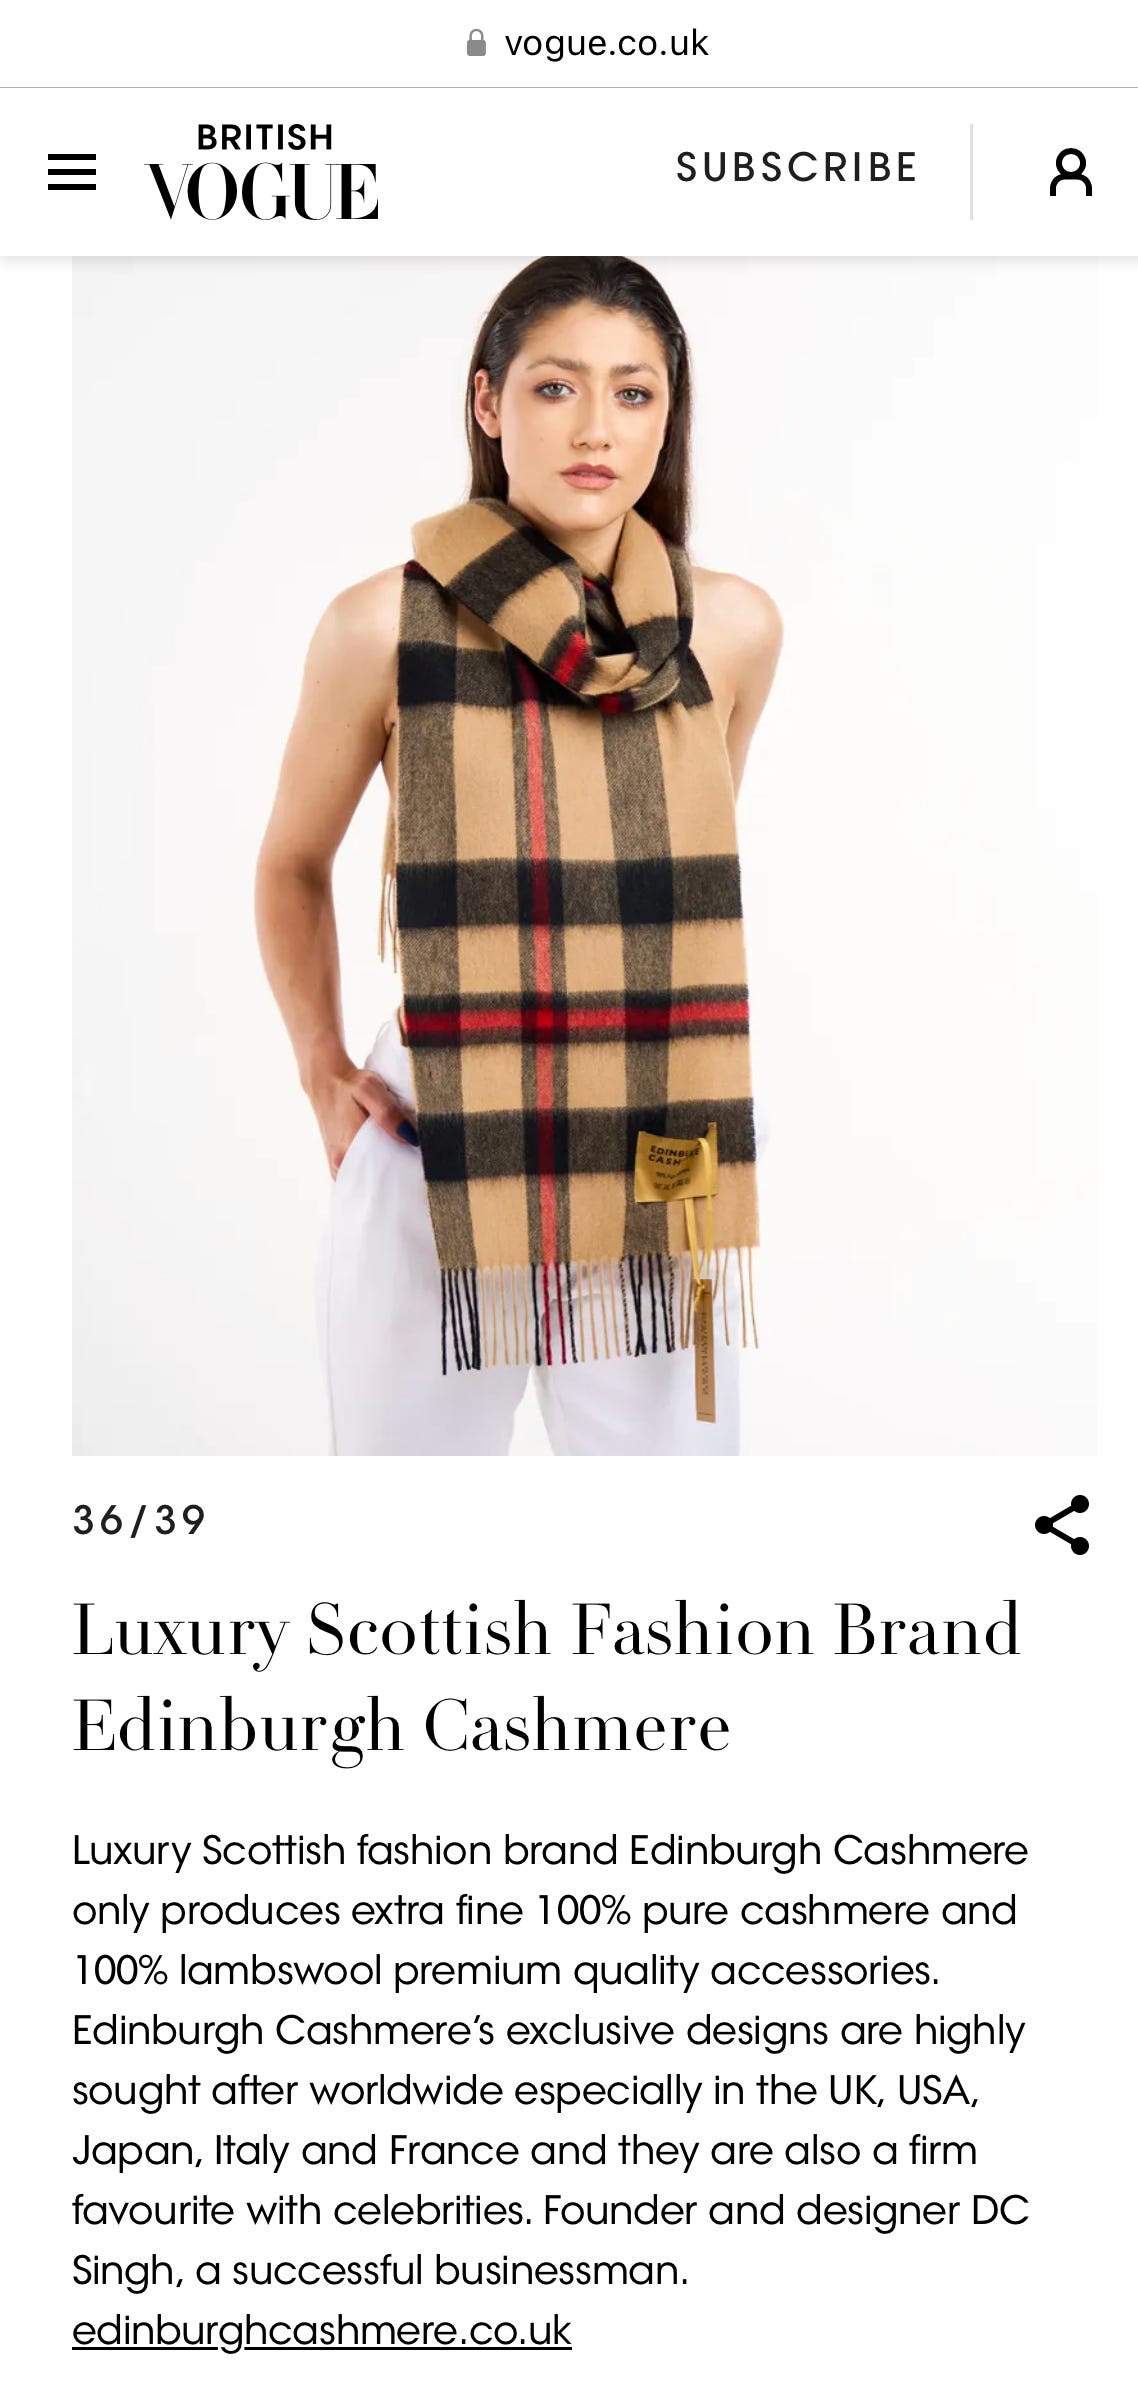 How To Spot a Fake Burberry Scarf: 6 Ways to Tell Real Scarves